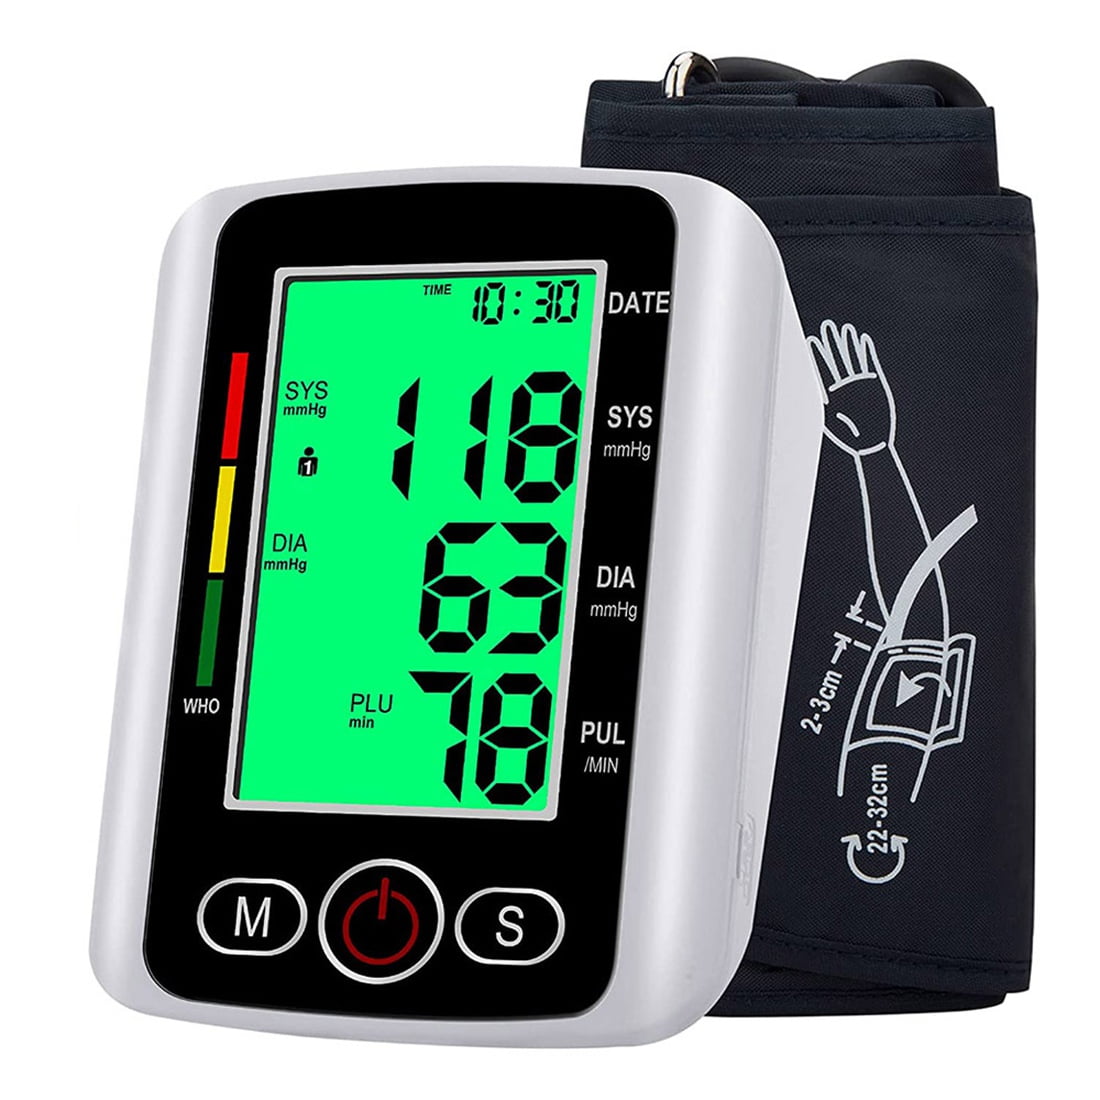 Get Fit Blood Pressure Monitor for Home Use Medical Upper Arm Blood  Pressure Machine Reader Pulse Rate Monitor - 2x99 Memory - Adjustable  8.5-16.5